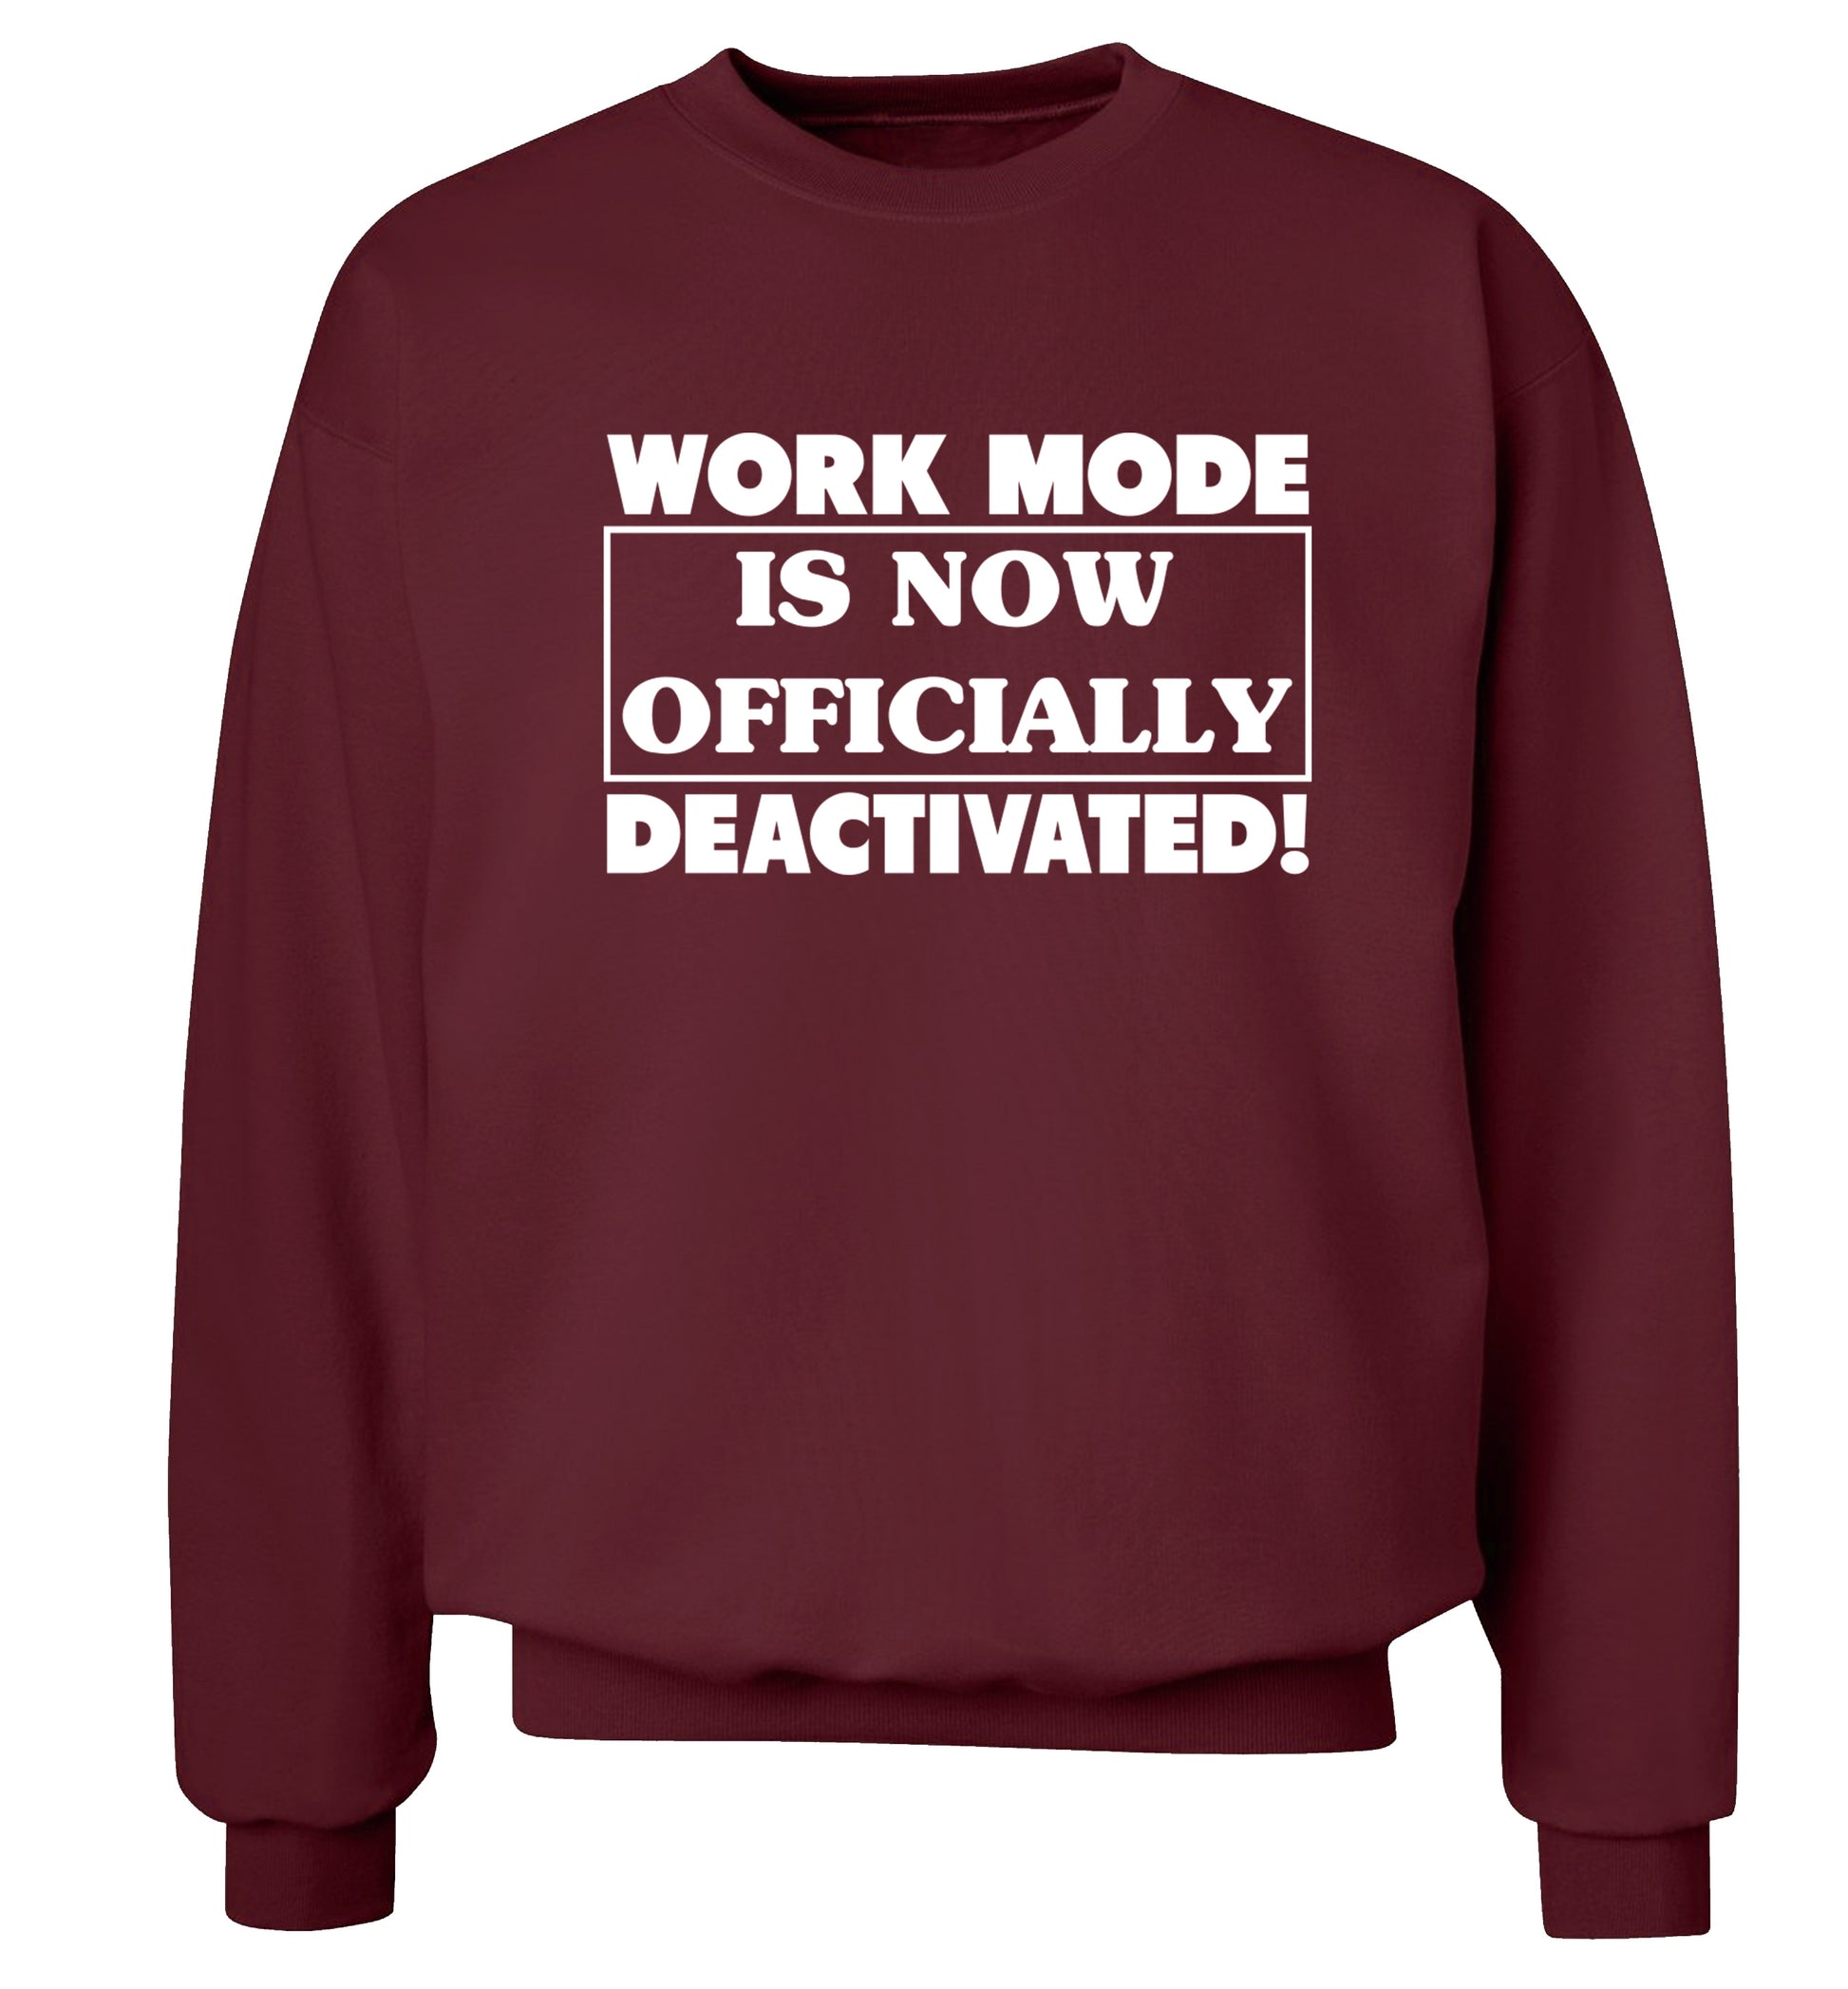 Work mode is now officially deactivated Adult's unisex maroon Sweater 2XL